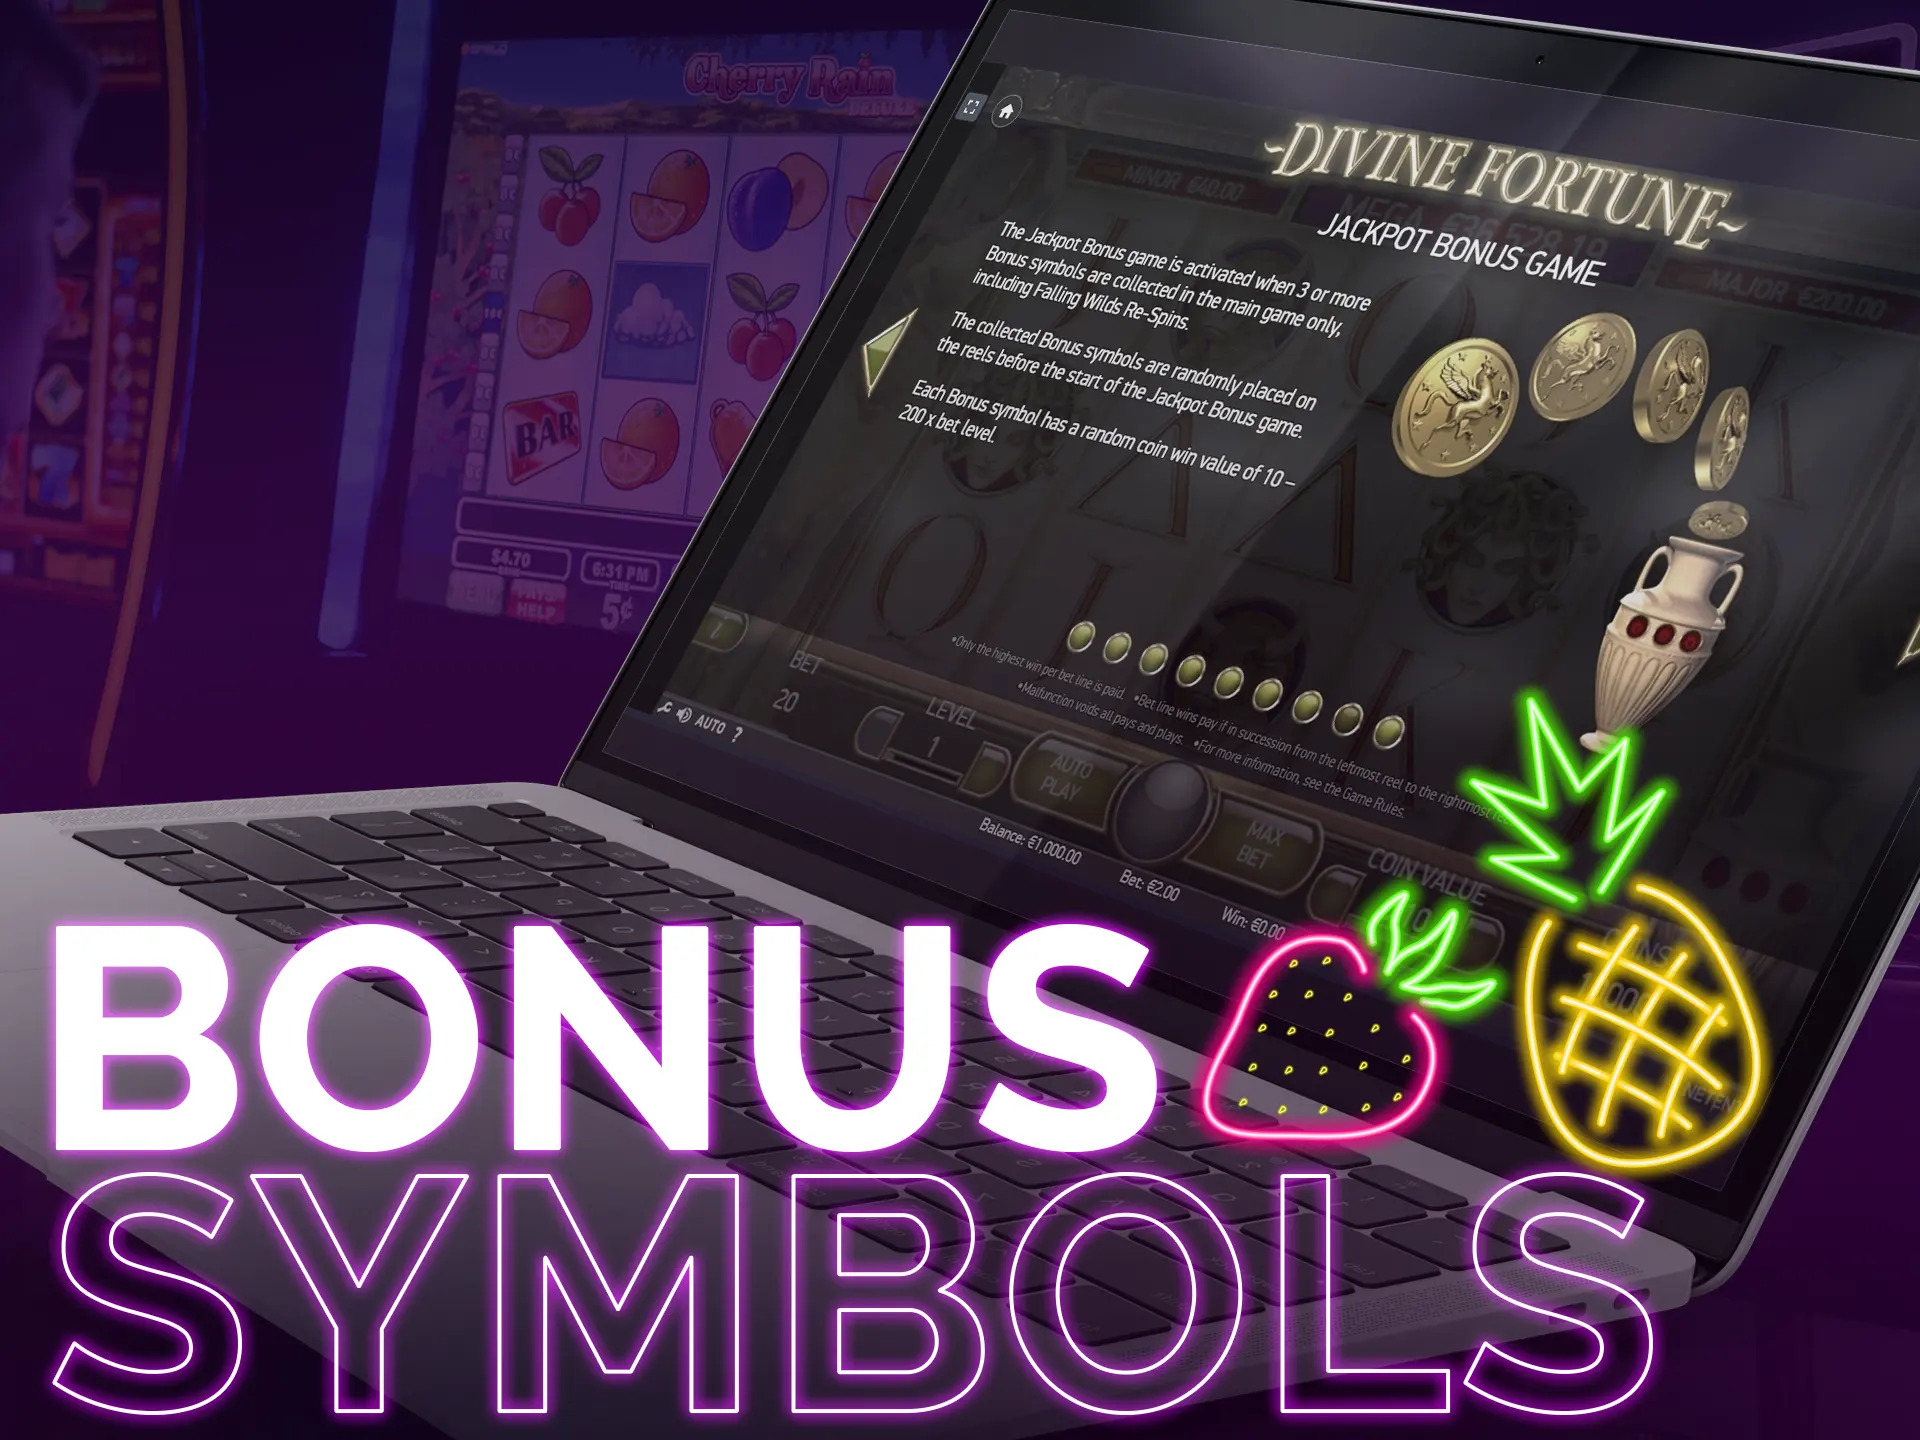 Bonus symbols activate games like Hold and Win or Wheel of Fortune.